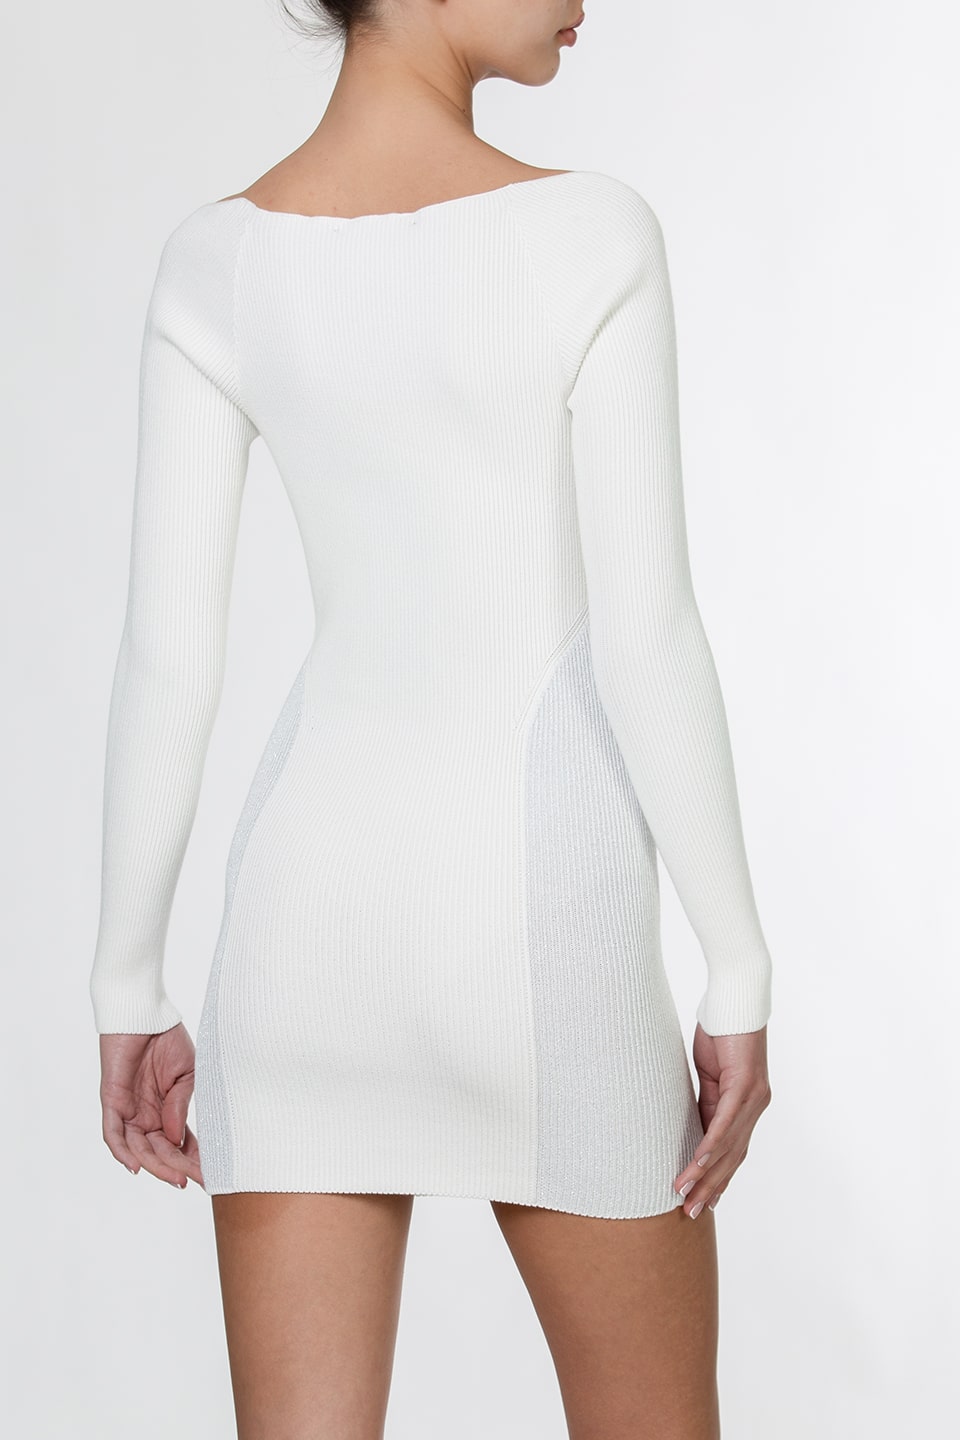 Thumbnail for Product gallery 2, Seven Dress White